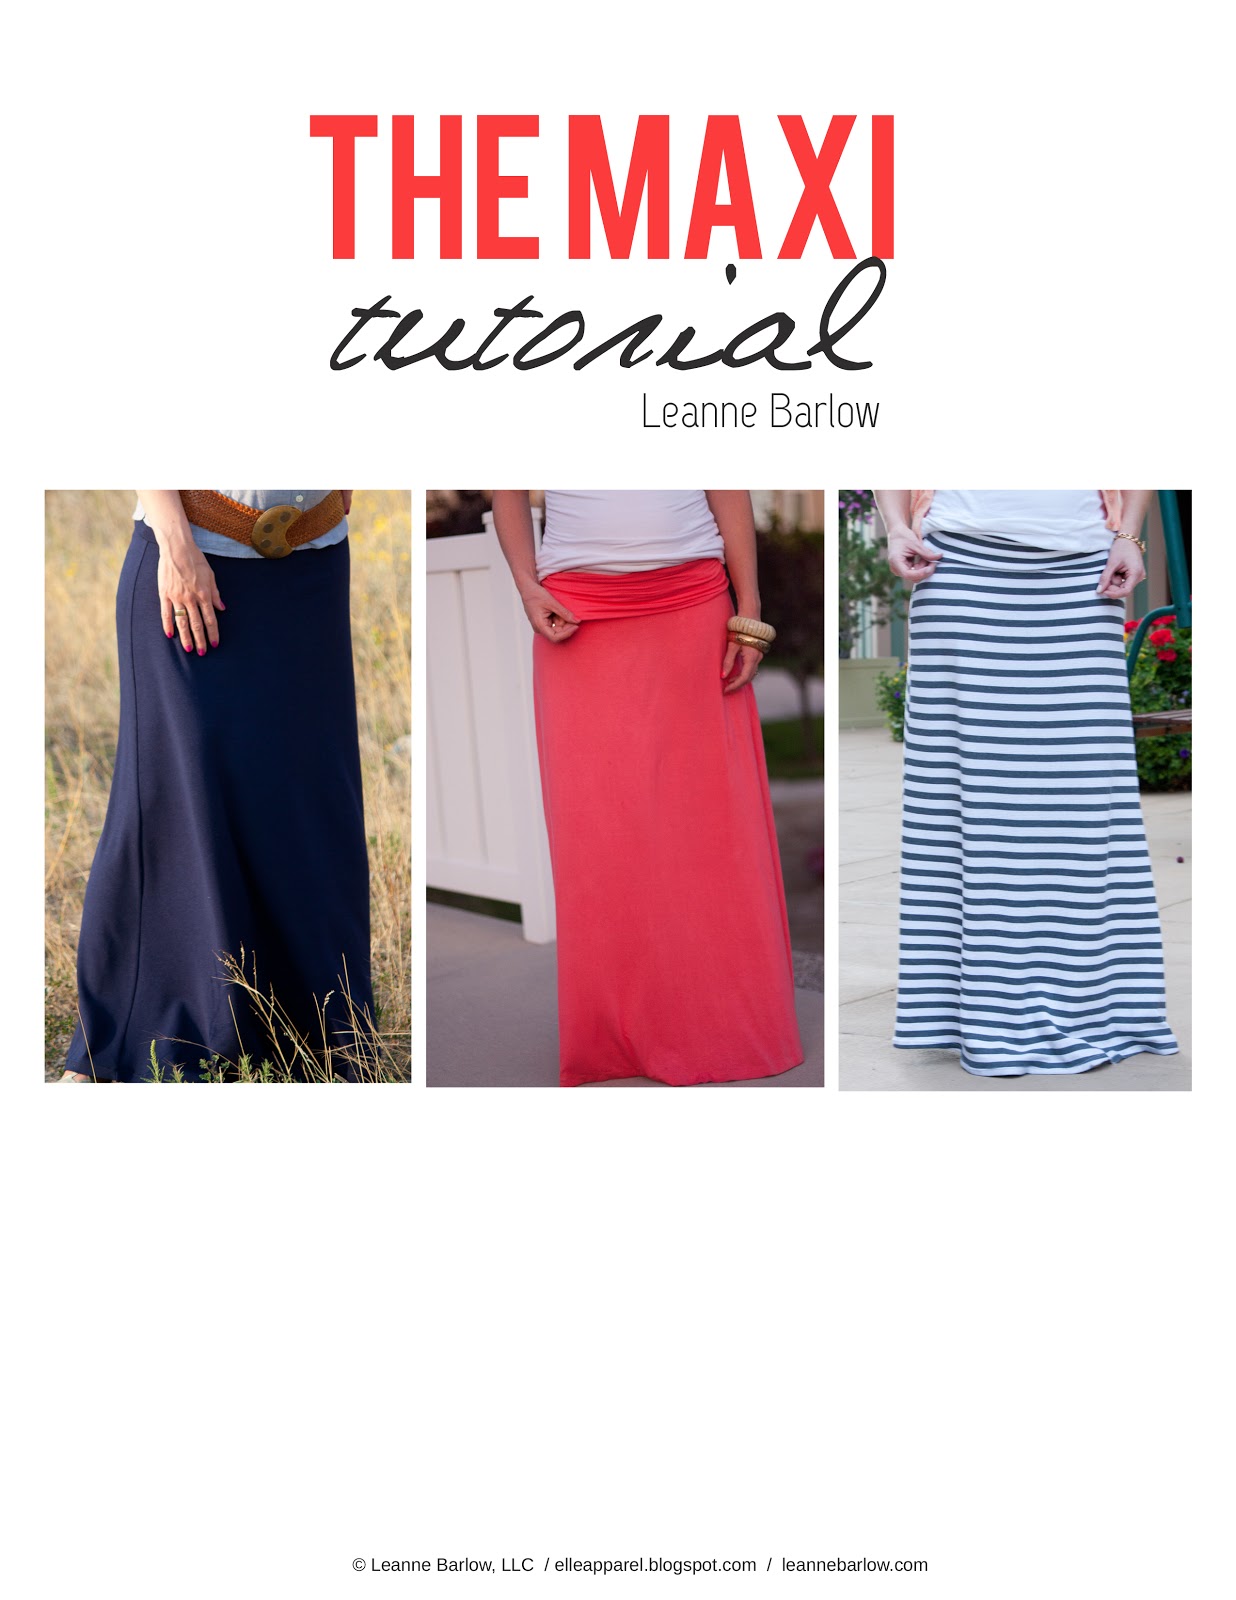 Elle Apparel: The Maxi tutorial revisted